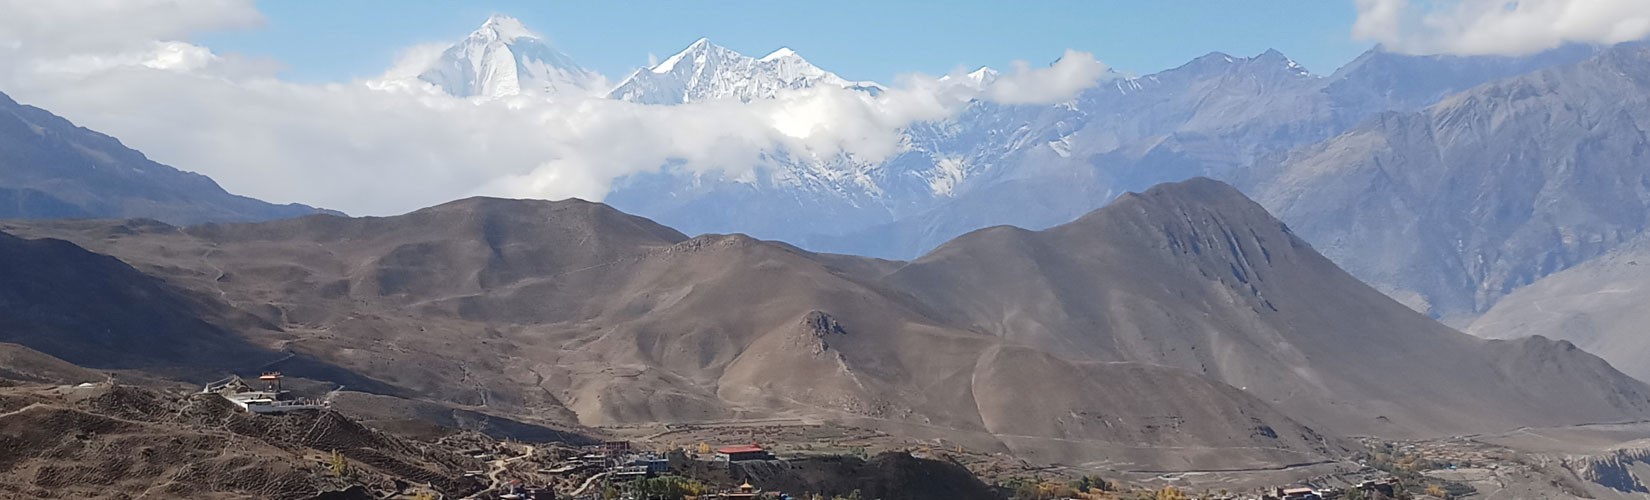  Multinational Sacred Temple and valley with views.